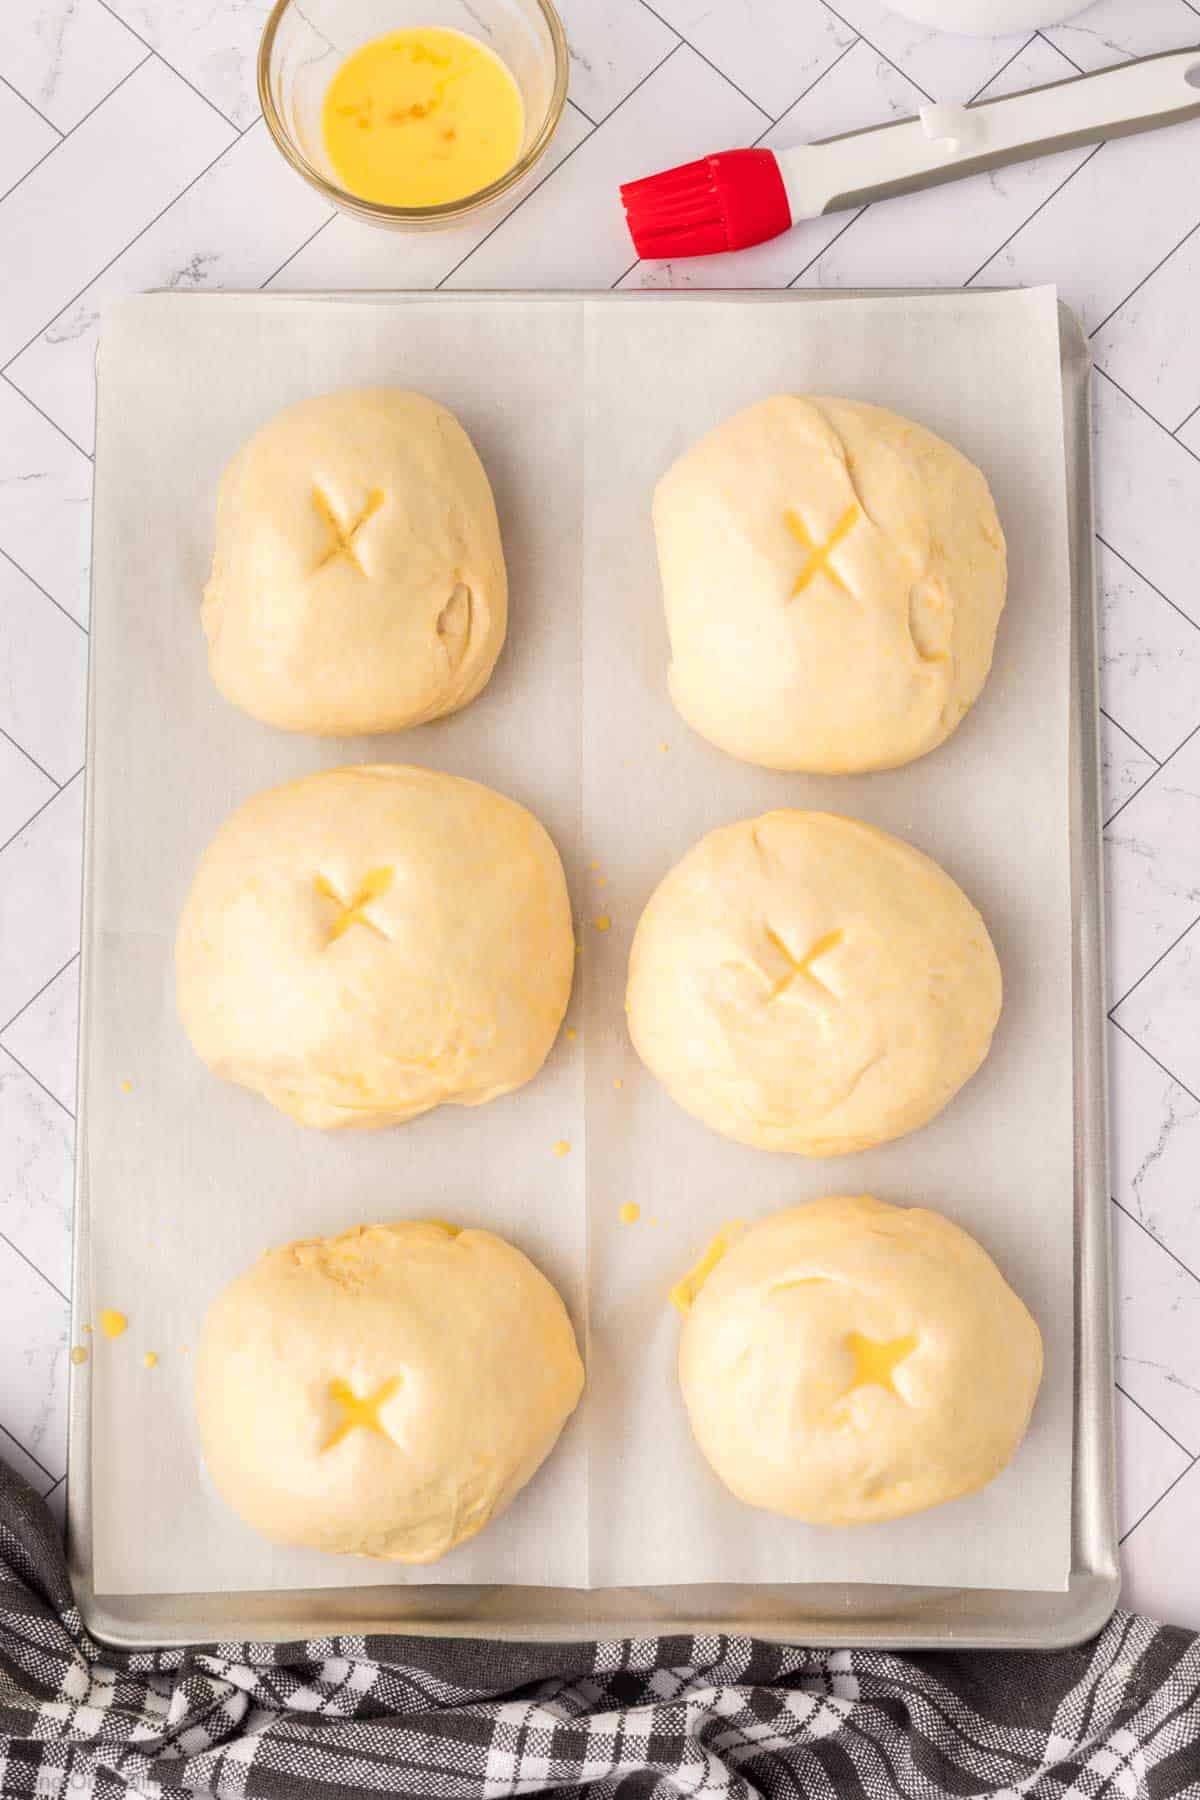 Placing dough balls on a baking sheet and topping with egg mixture